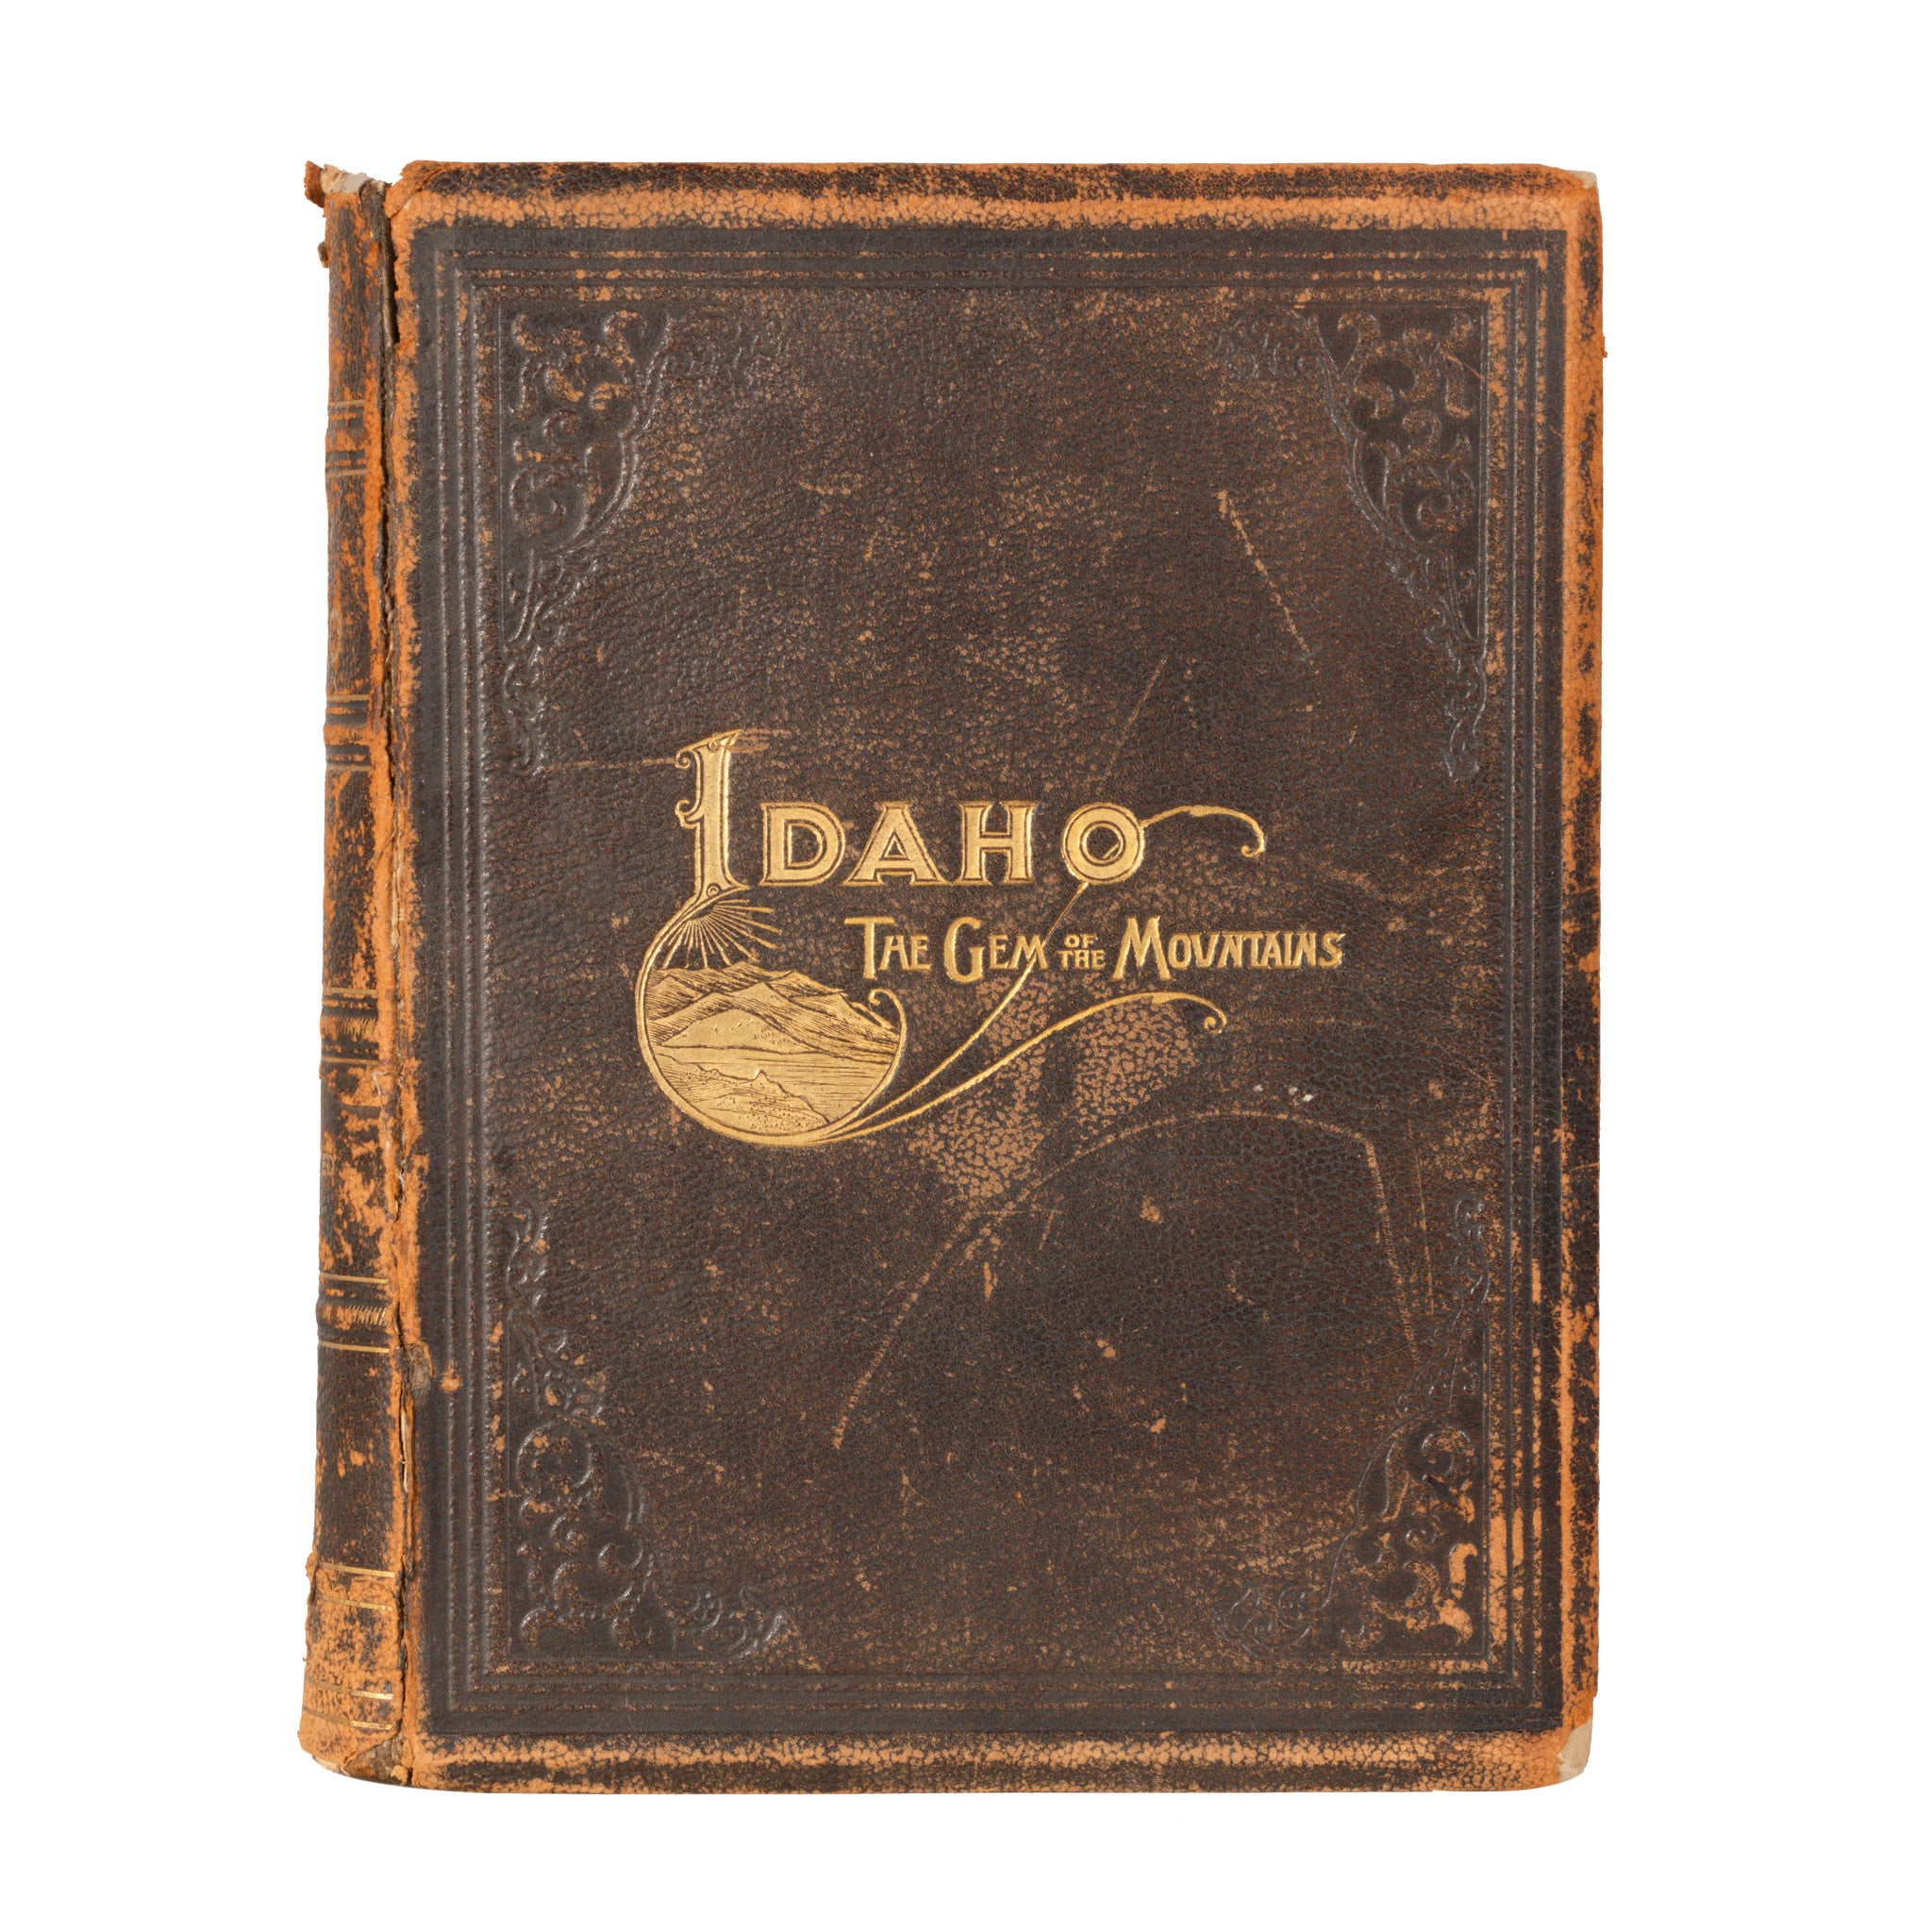 Idaho-The Gem of the Mountains Illustrated Book, Furnishings, Decor, Book